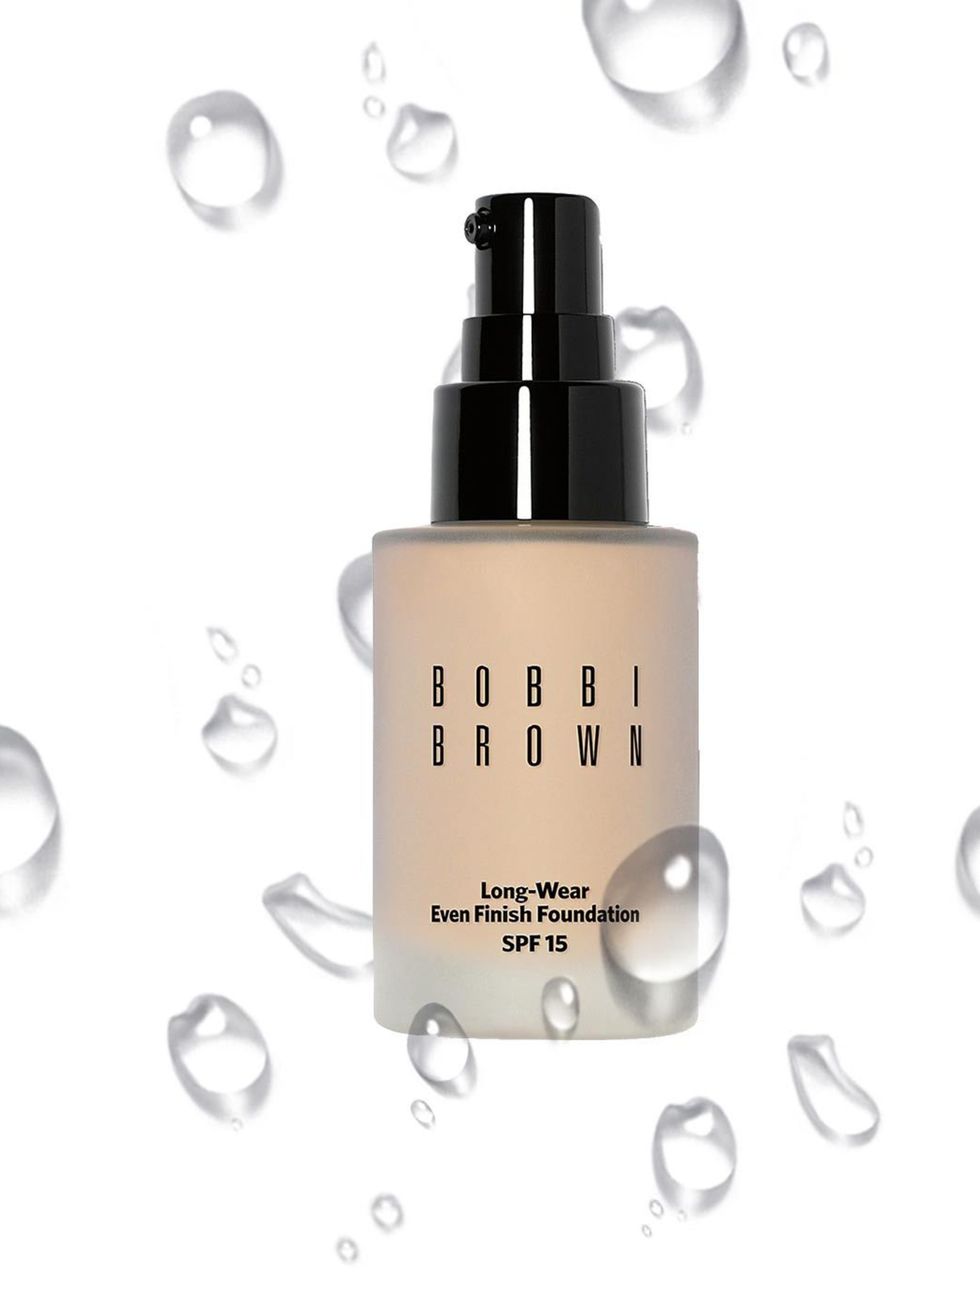 <p><a href="http://www.bobbibrown.co.uk/products/spp/index.tmpl?CATEGORY_ID=CAT5141&amp;PRODUCT_ID=PROD22257">Bobbi Brown Long-Wear Even Finish Foundation SPF 15, £30</a></p>